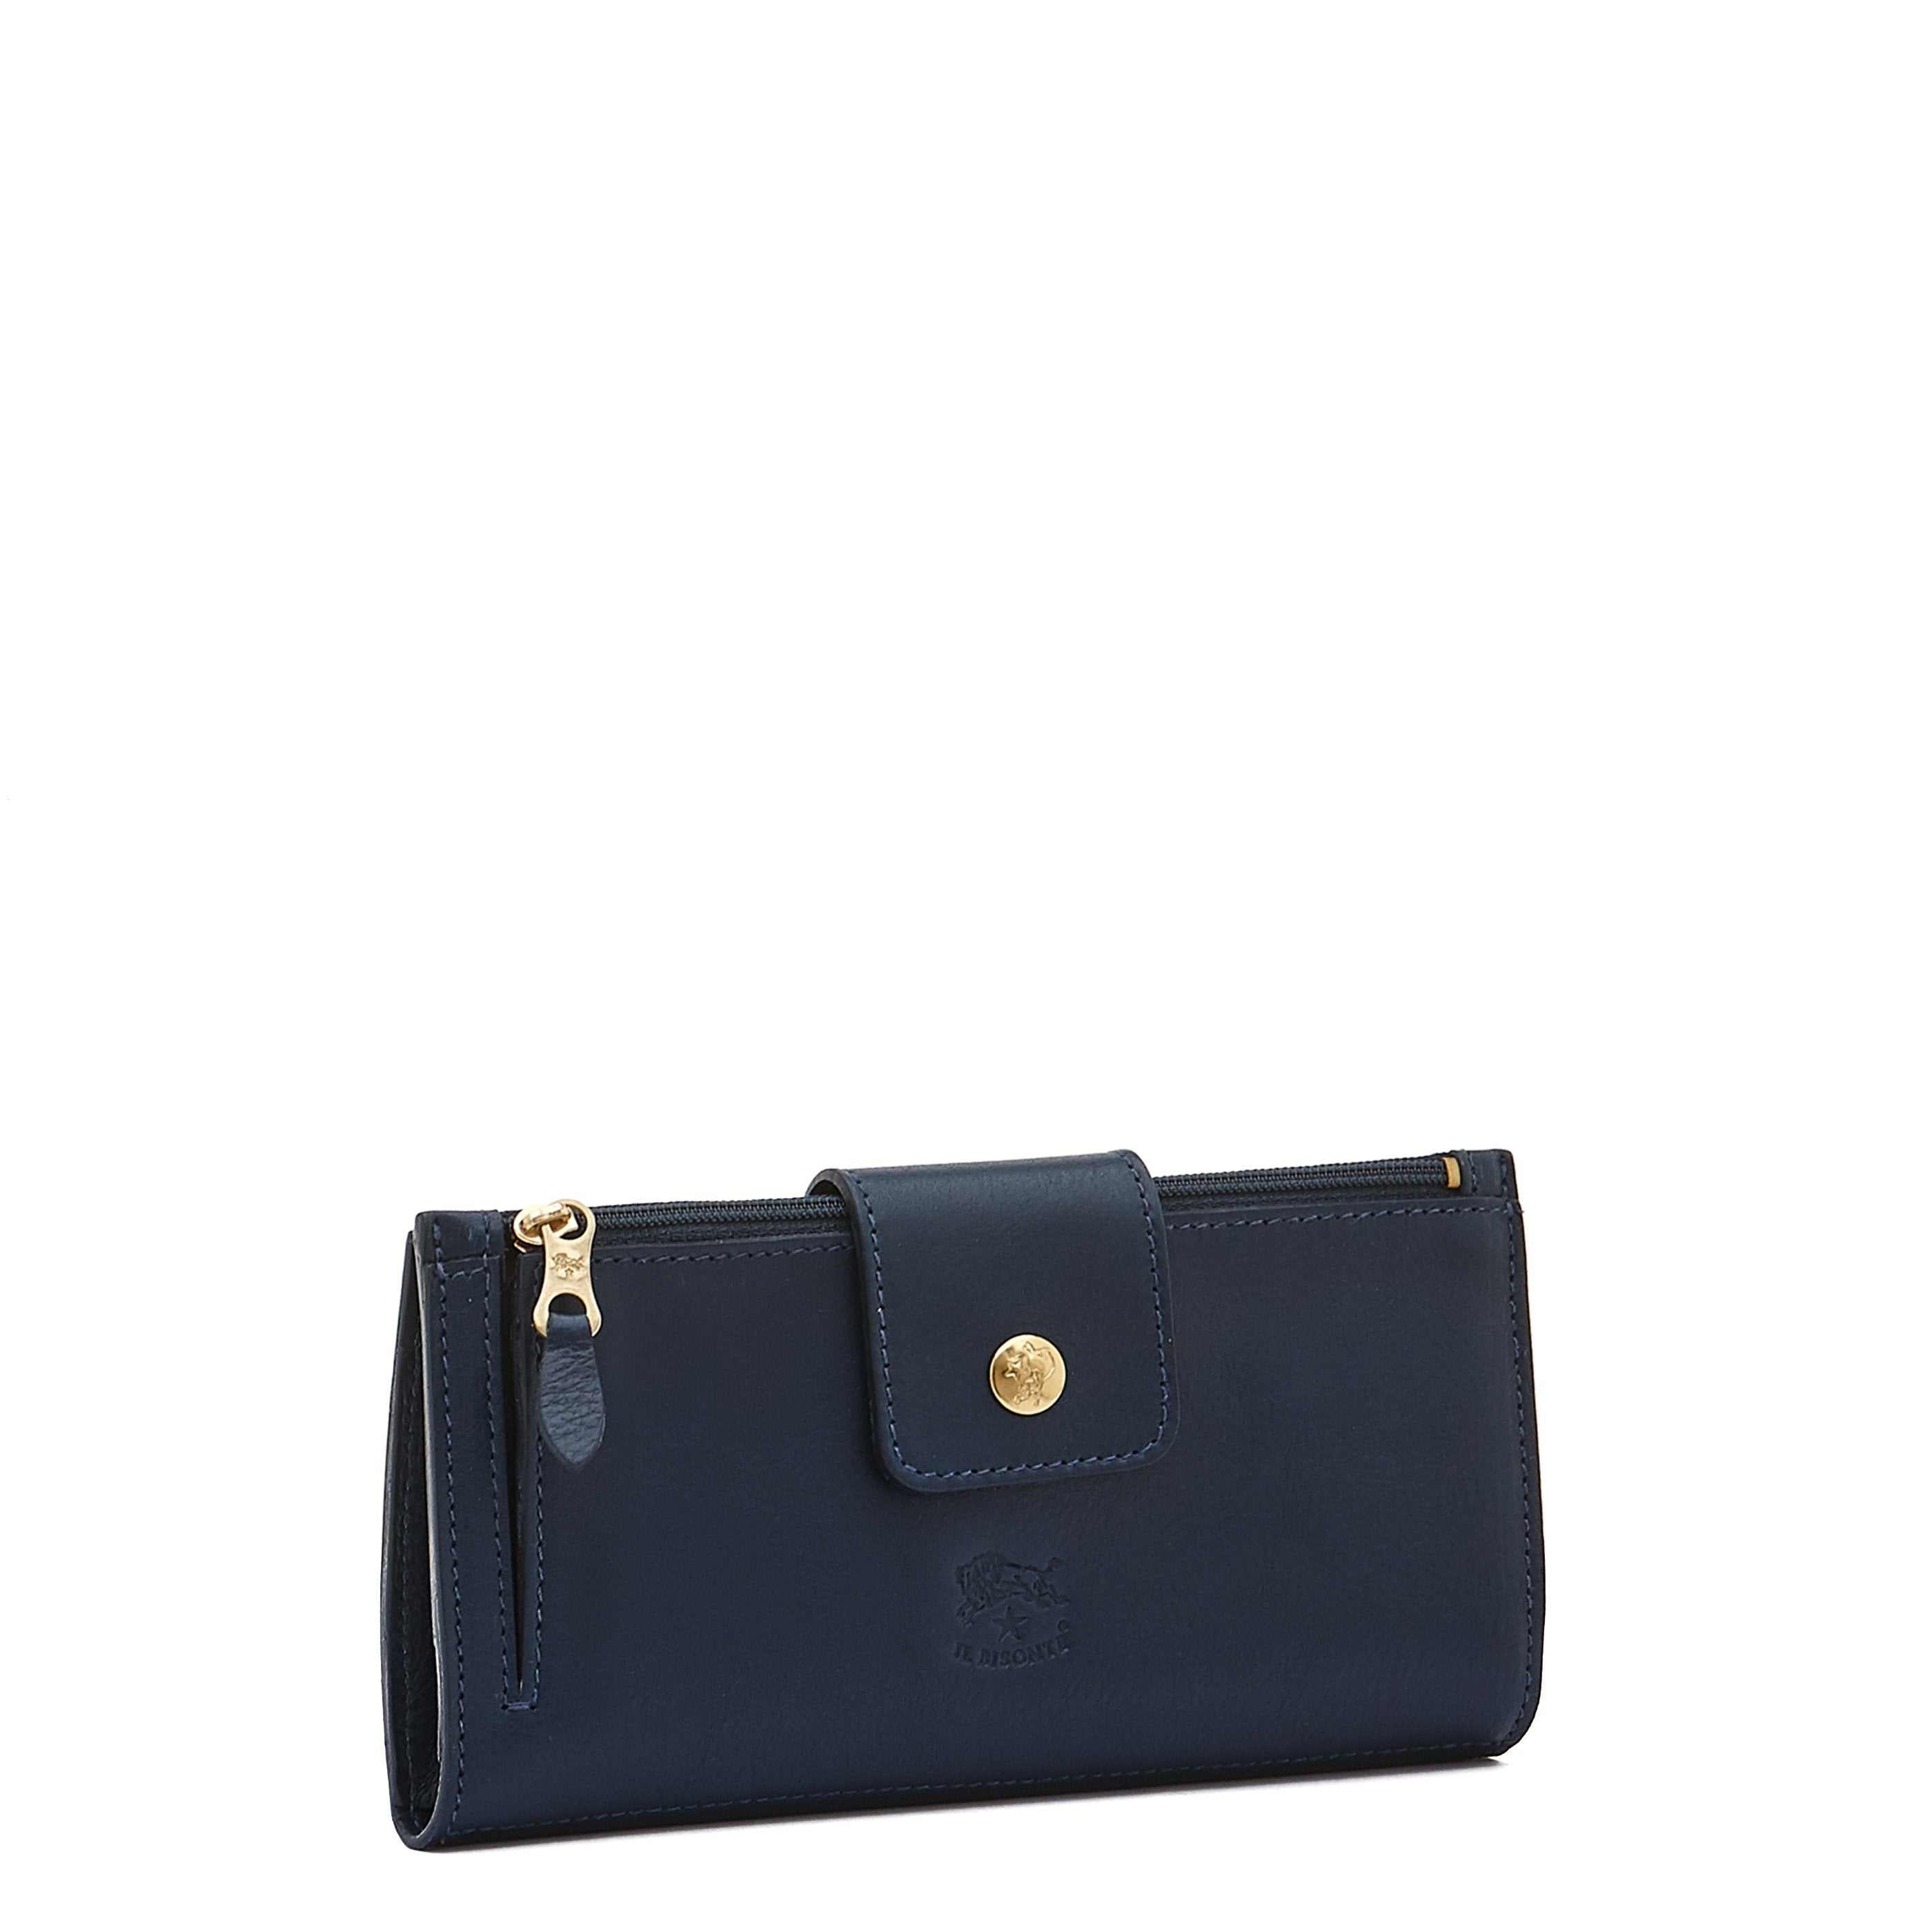 Women's Continental Wallet in Calf Leather color Blue